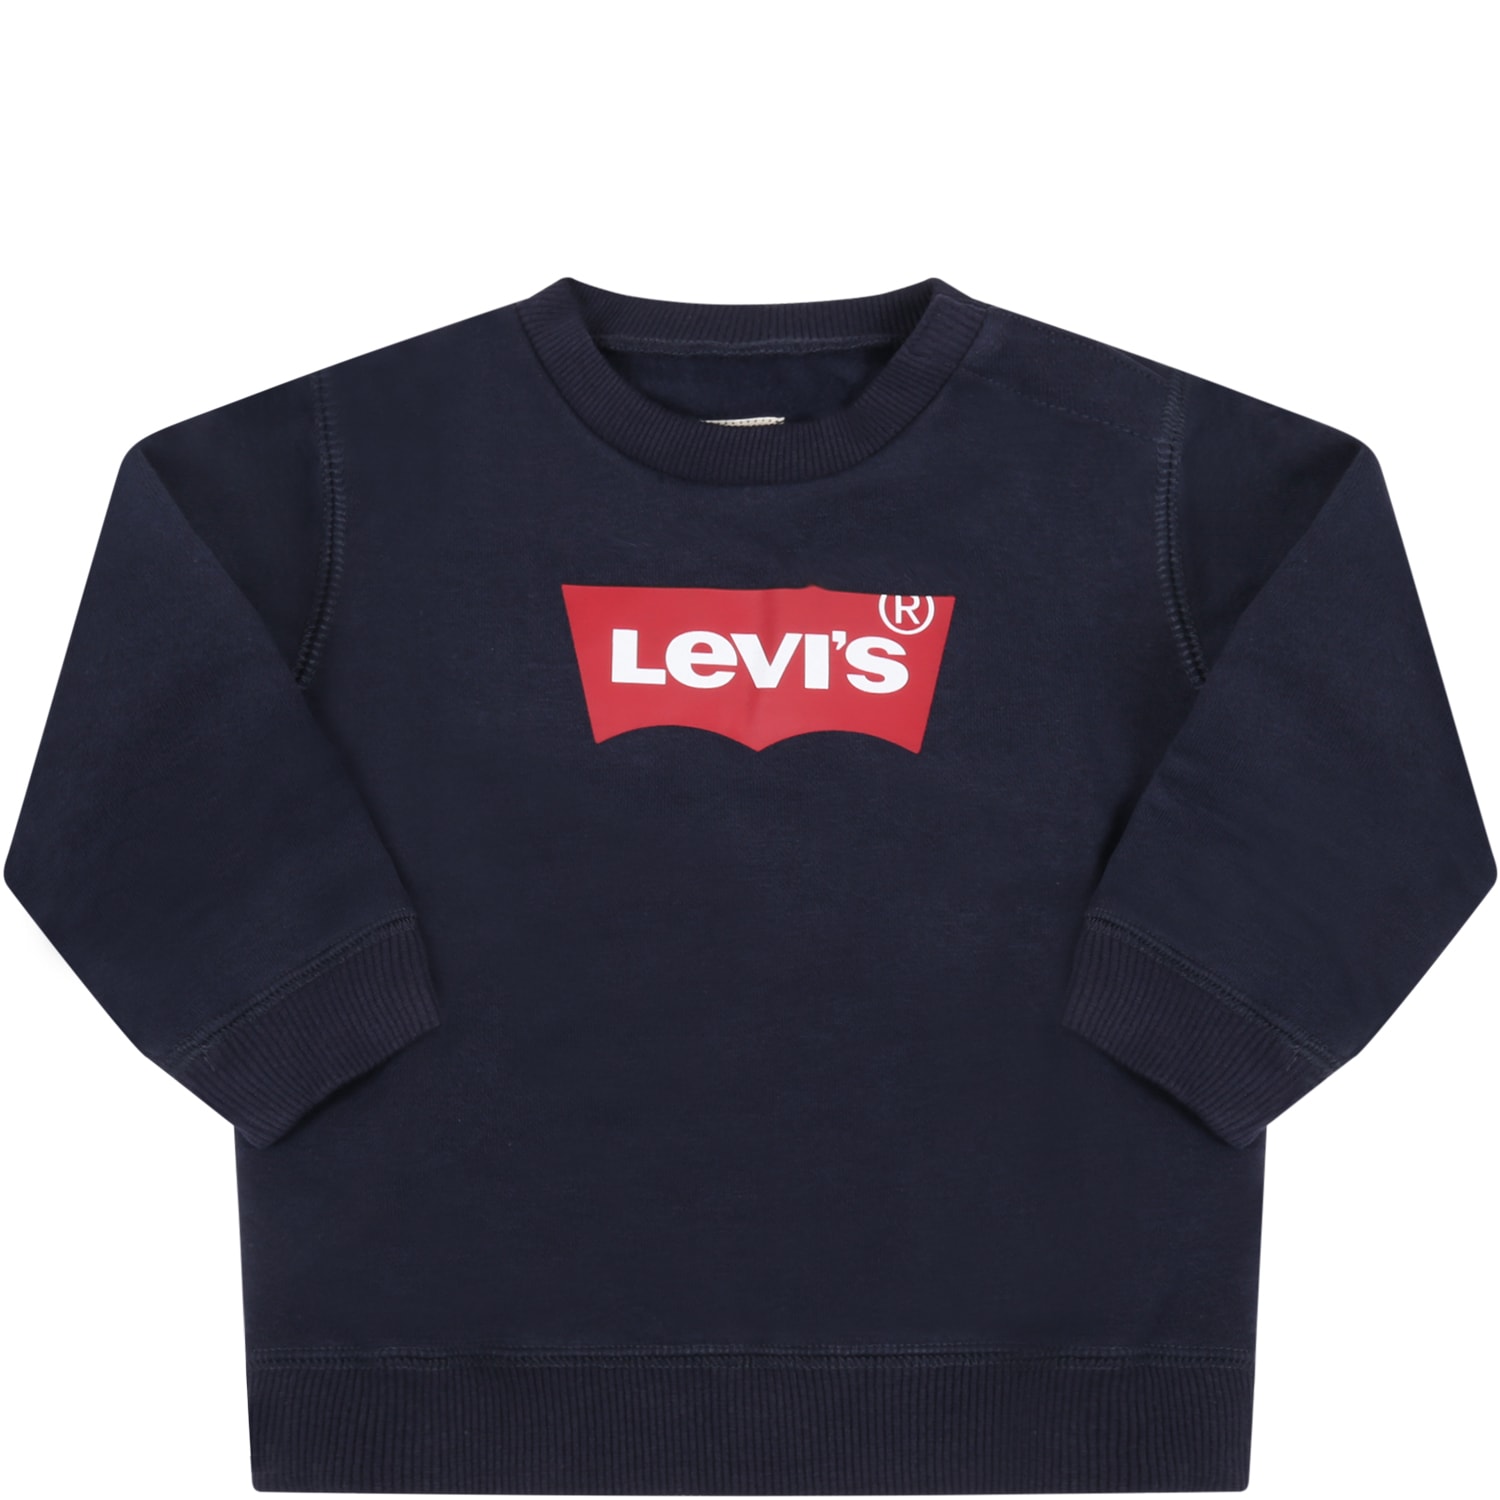 Levi's Blue Sweatshirt For Baby Kids With Logo